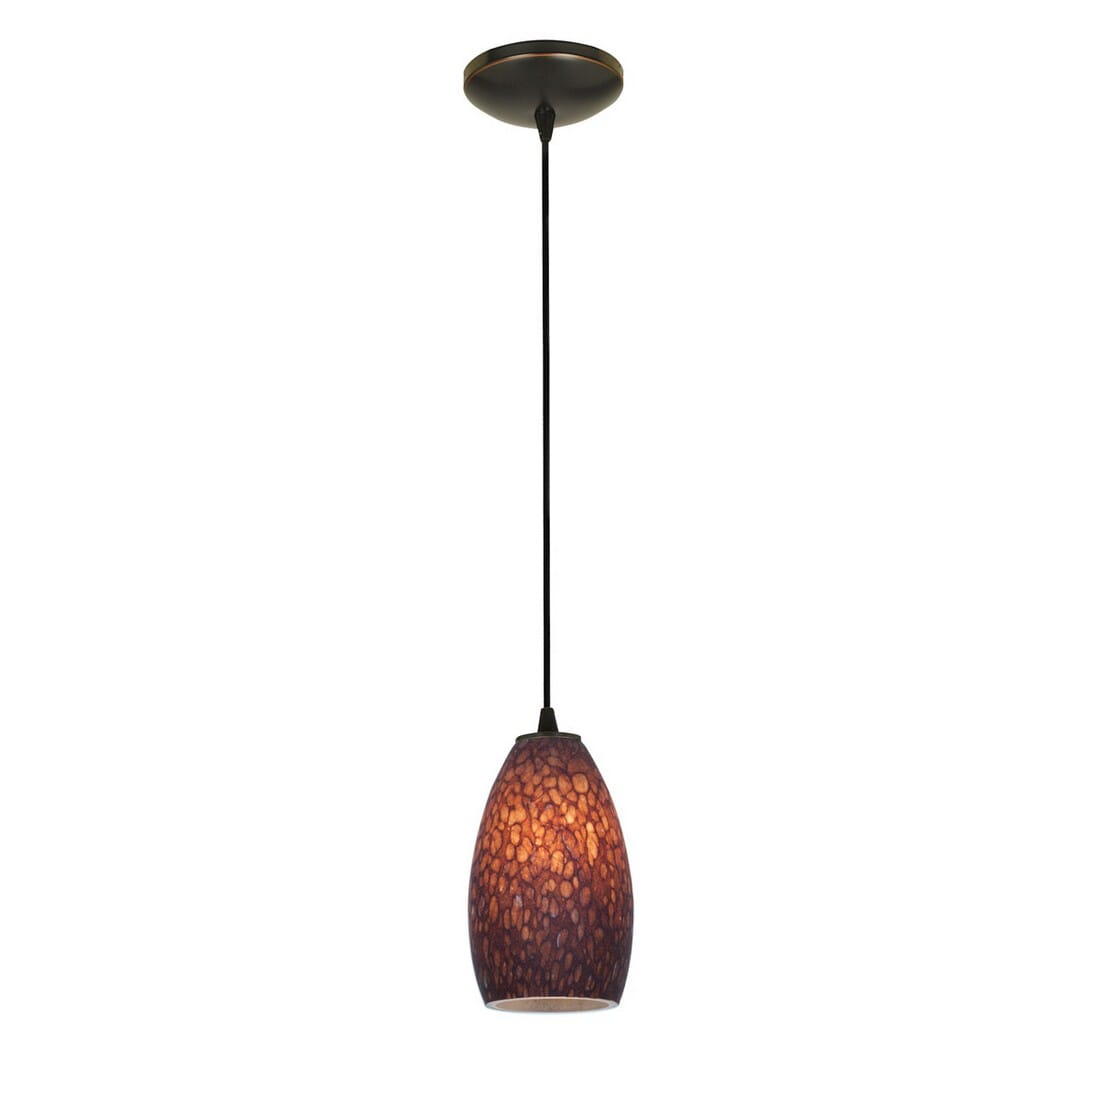 Access Champagne Pendant Light in Oil Rubbed Bronze -  Access Lighting, 28012-1C-ORB/BRST